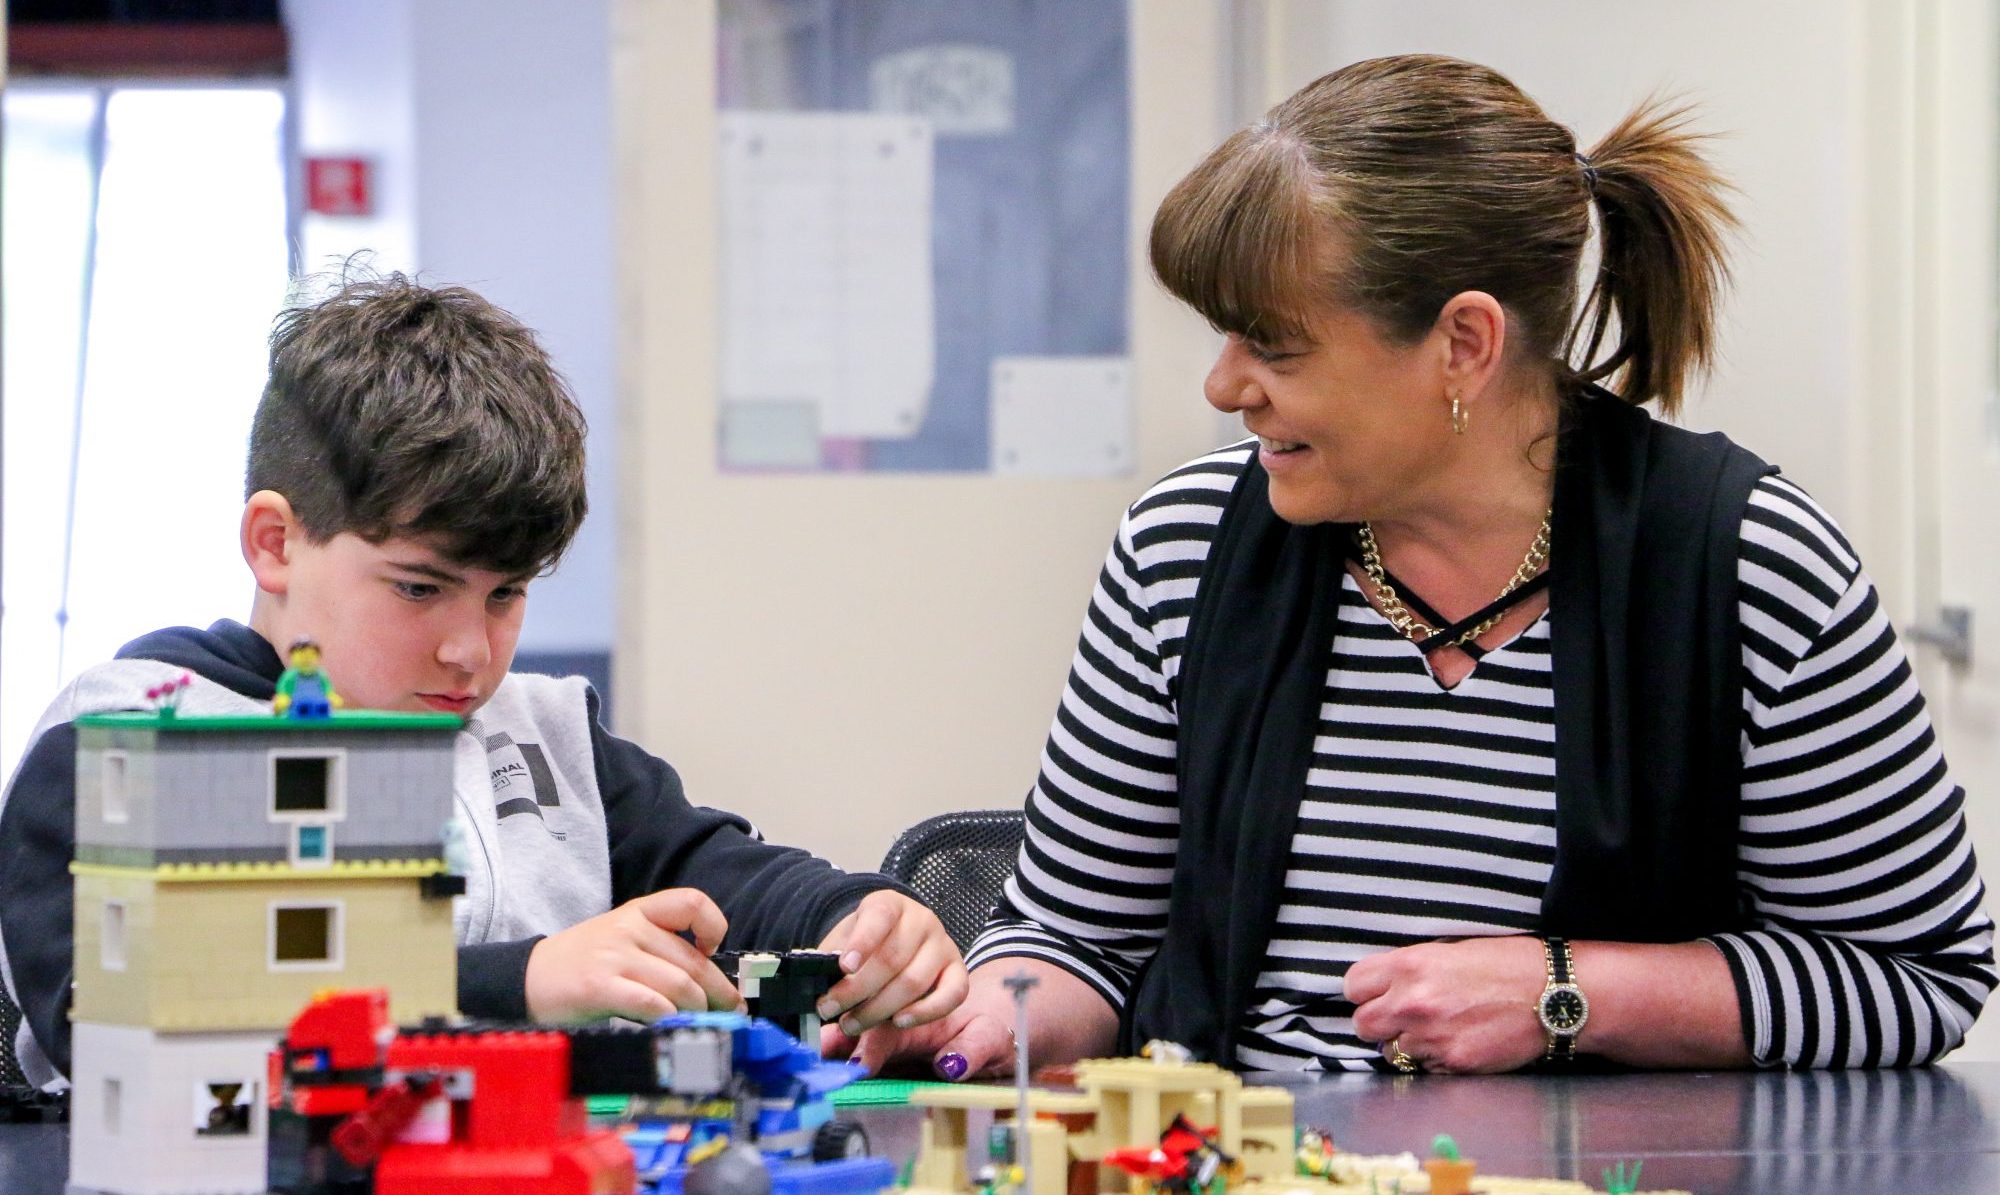 Lego builds new skills for children with - AnglicareSA